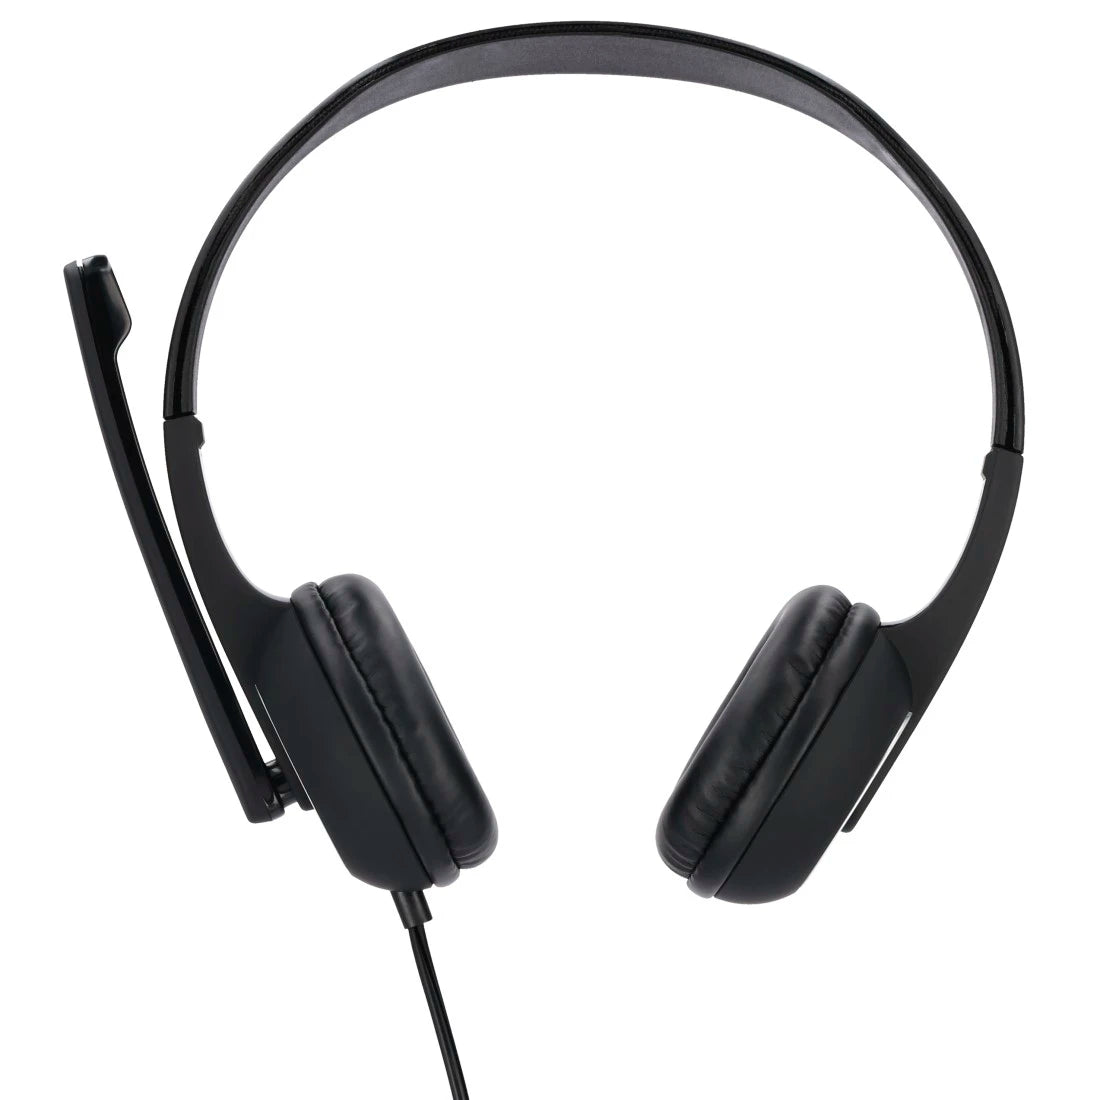 Hama HS-P150 PC Office Stereo Headset with 3.5mm Jack Adapter